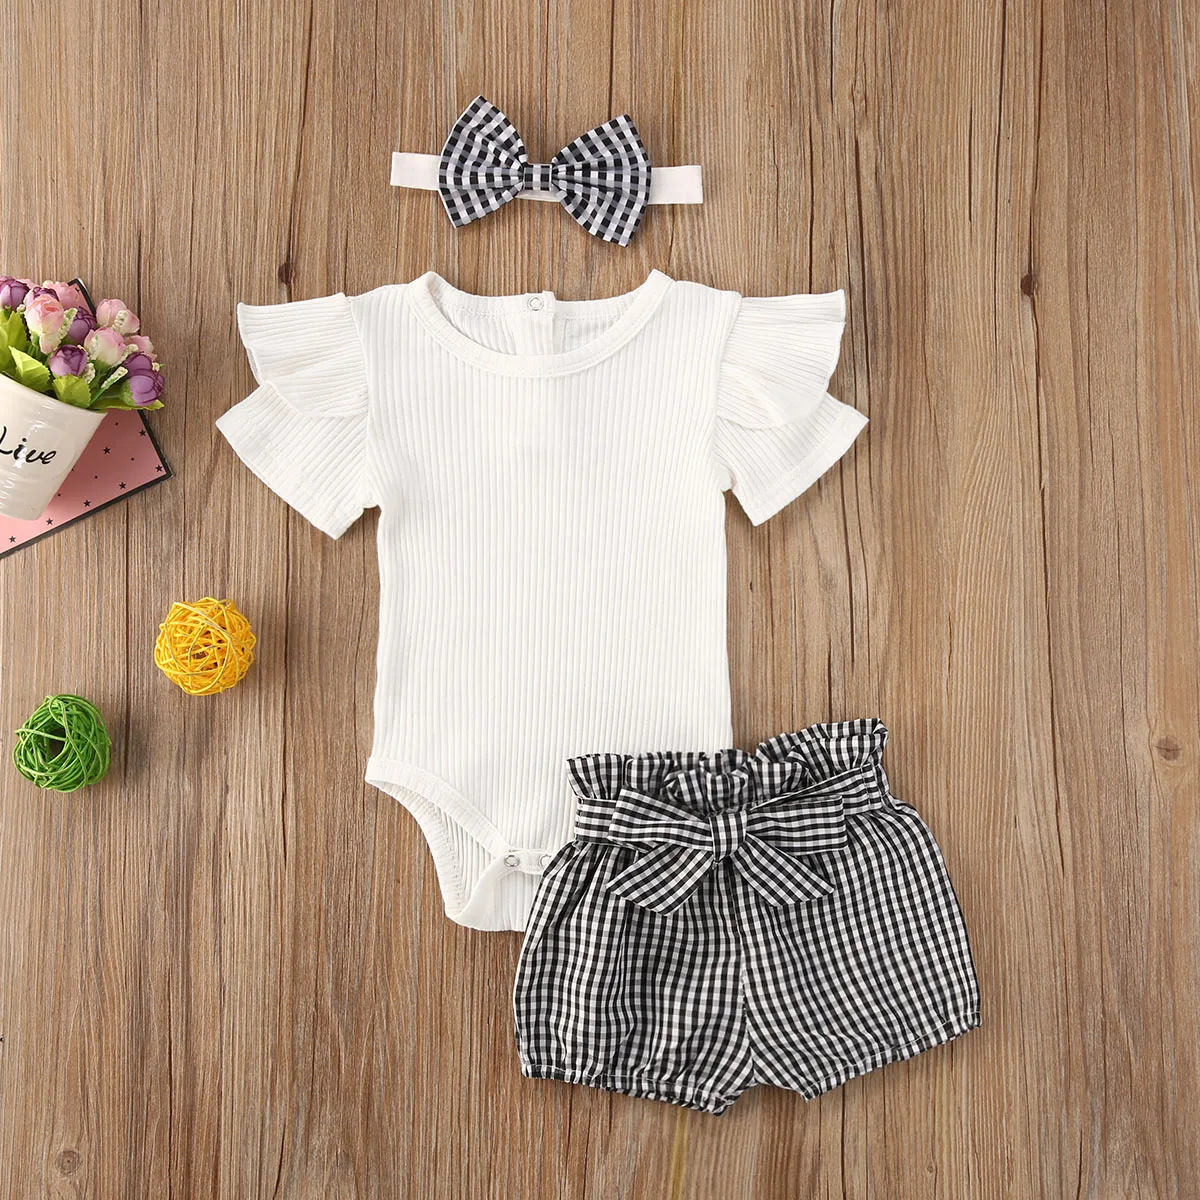 baby knitted clothing set Summer Solid 3Pcs Infant Girl Outfits Short Sleeve Ruffle Romper Plaid Shorts Bow Headband Baby Clothing Sets baby clothing set long sleeve	